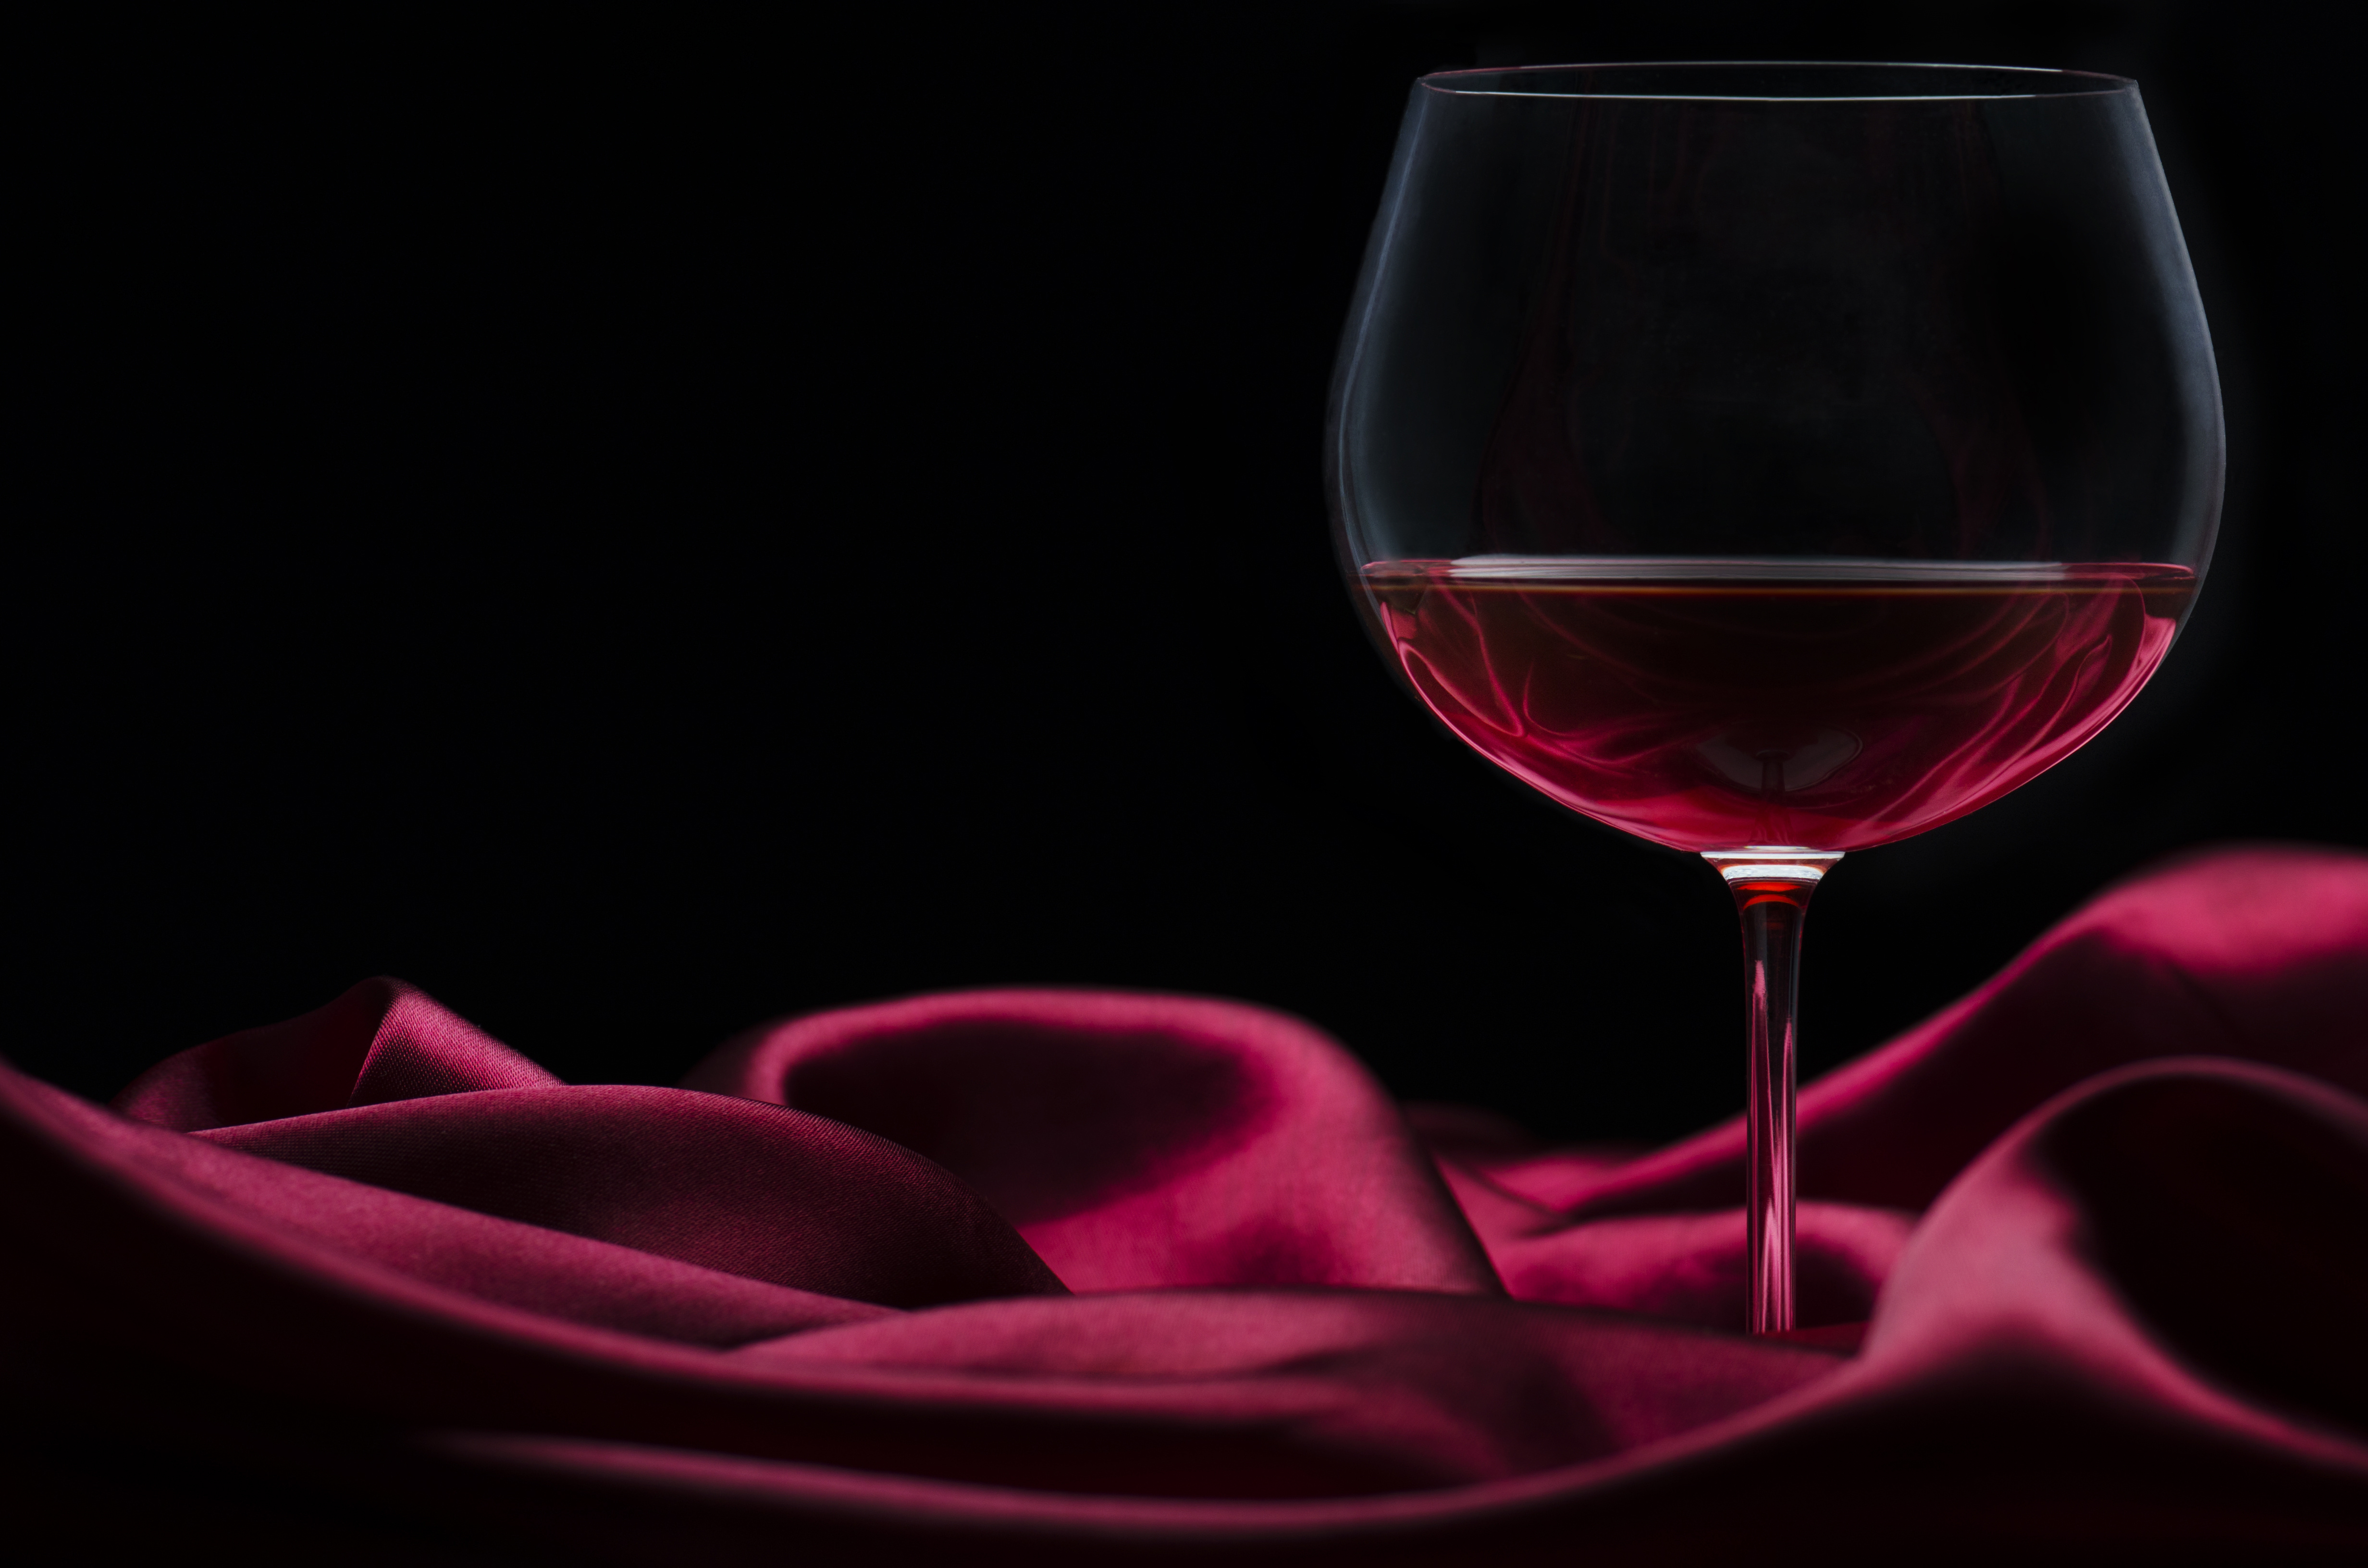 Wine Glass Wallpaper Screensavers Hi Quality Photo Car Pictures